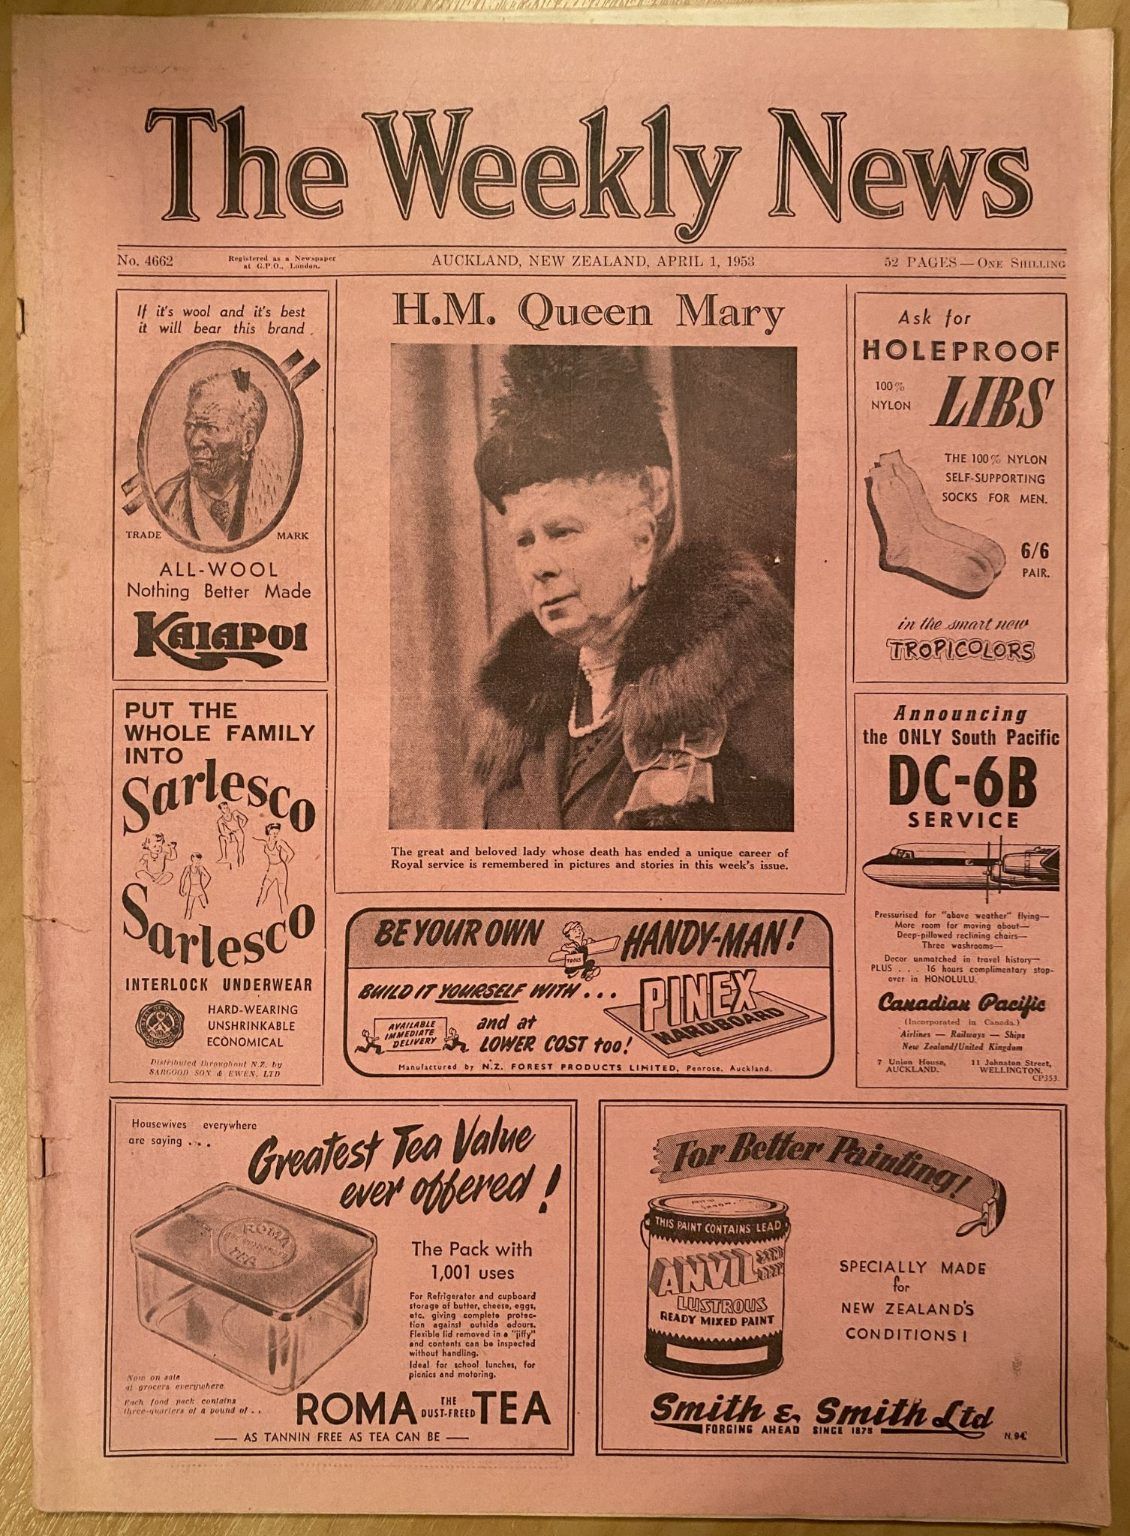 OLD NEWSPAPER: The Weekly News - No. 4662, 1 April 1953